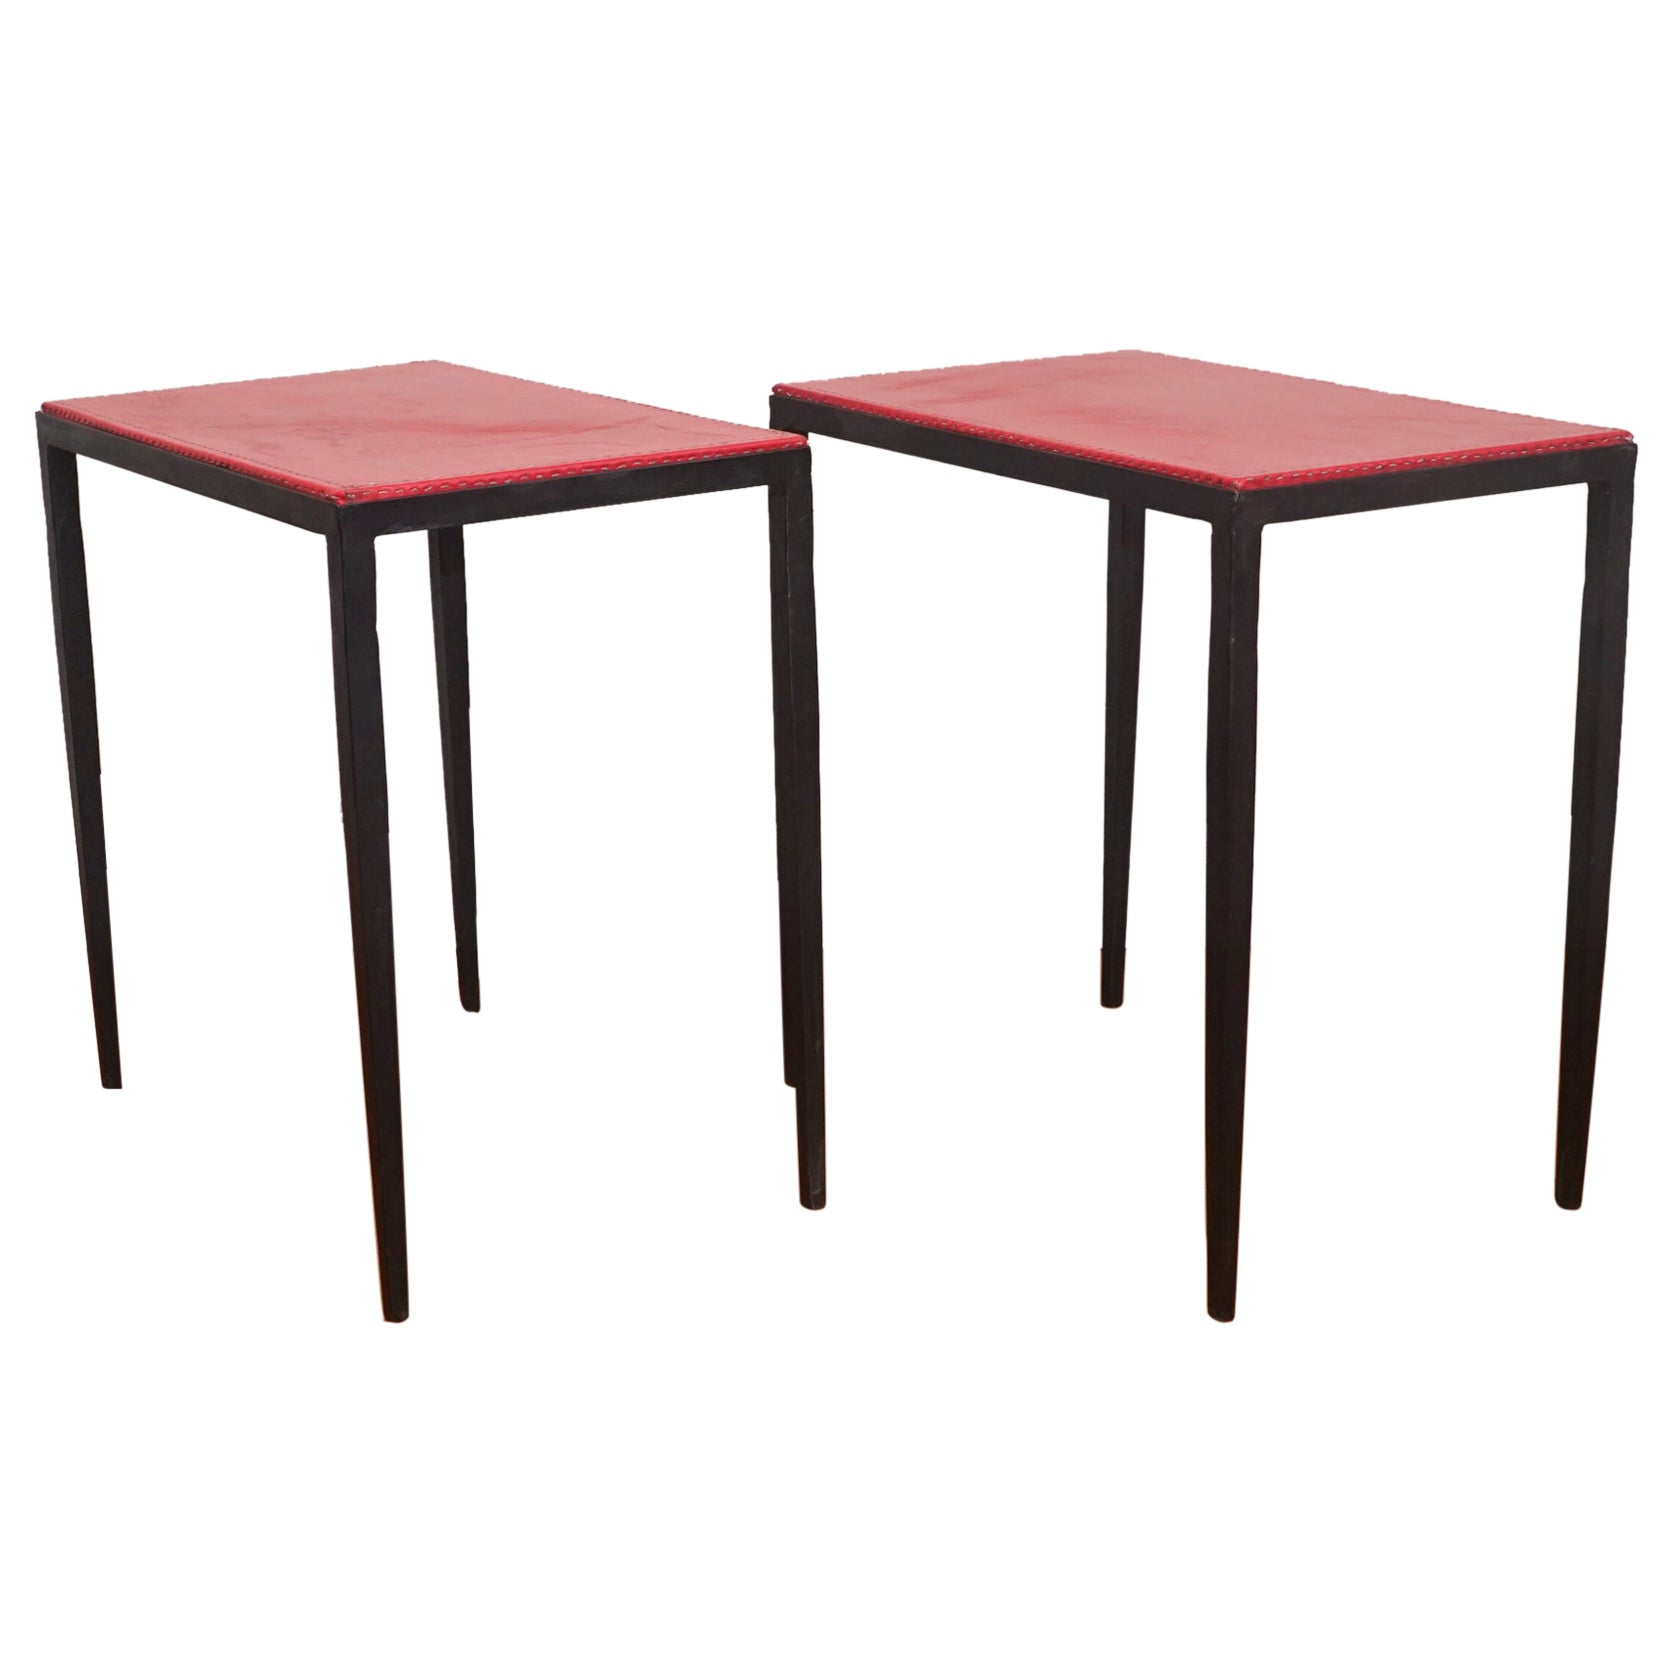 Pair of Iron Leather Side Tables in the Style of Jean-Michel Frank